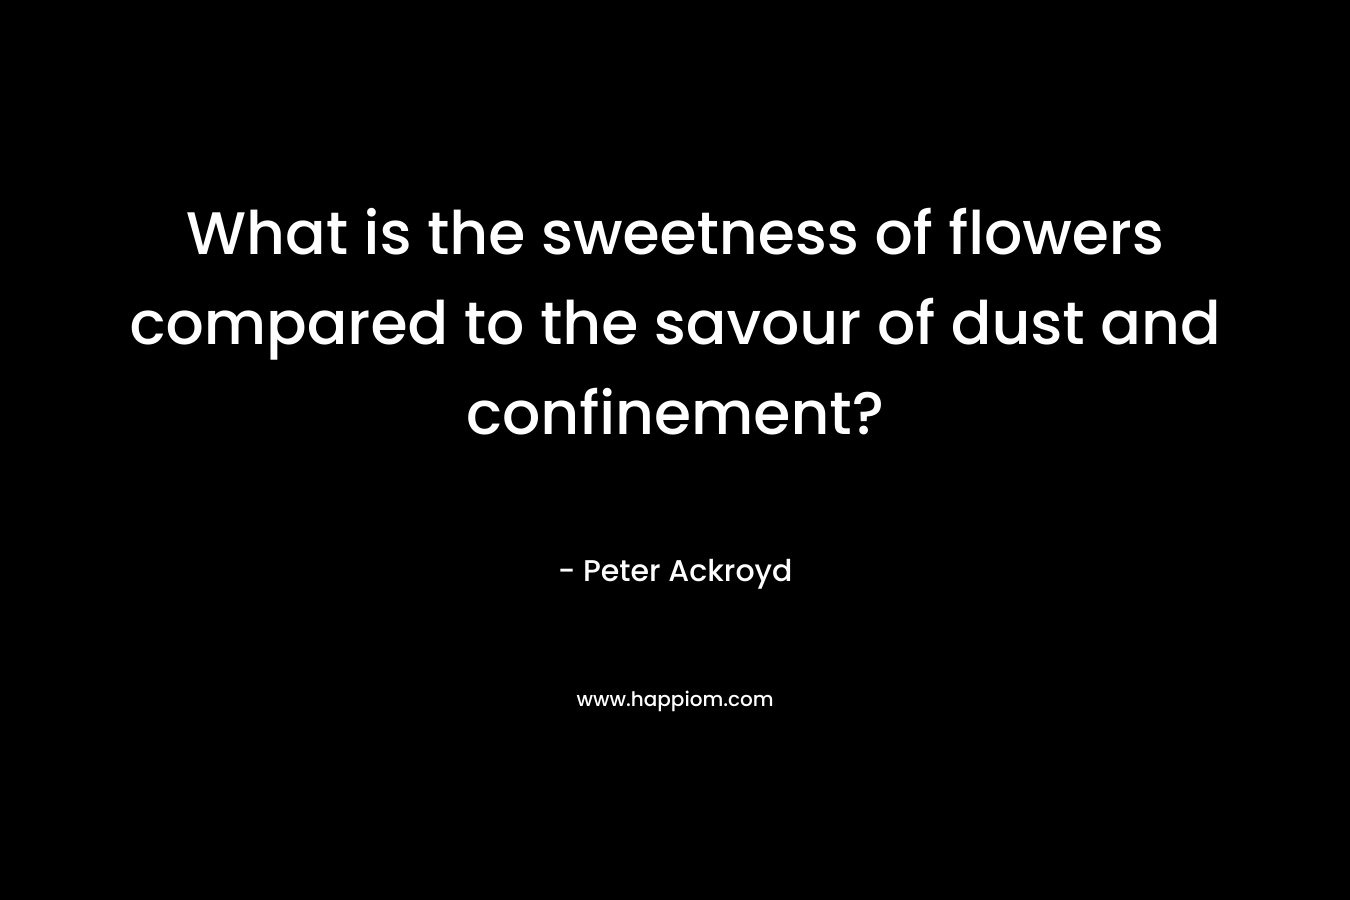 What is the sweetness of flowers compared to the savour of dust and confinement? – Peter Ackroyd